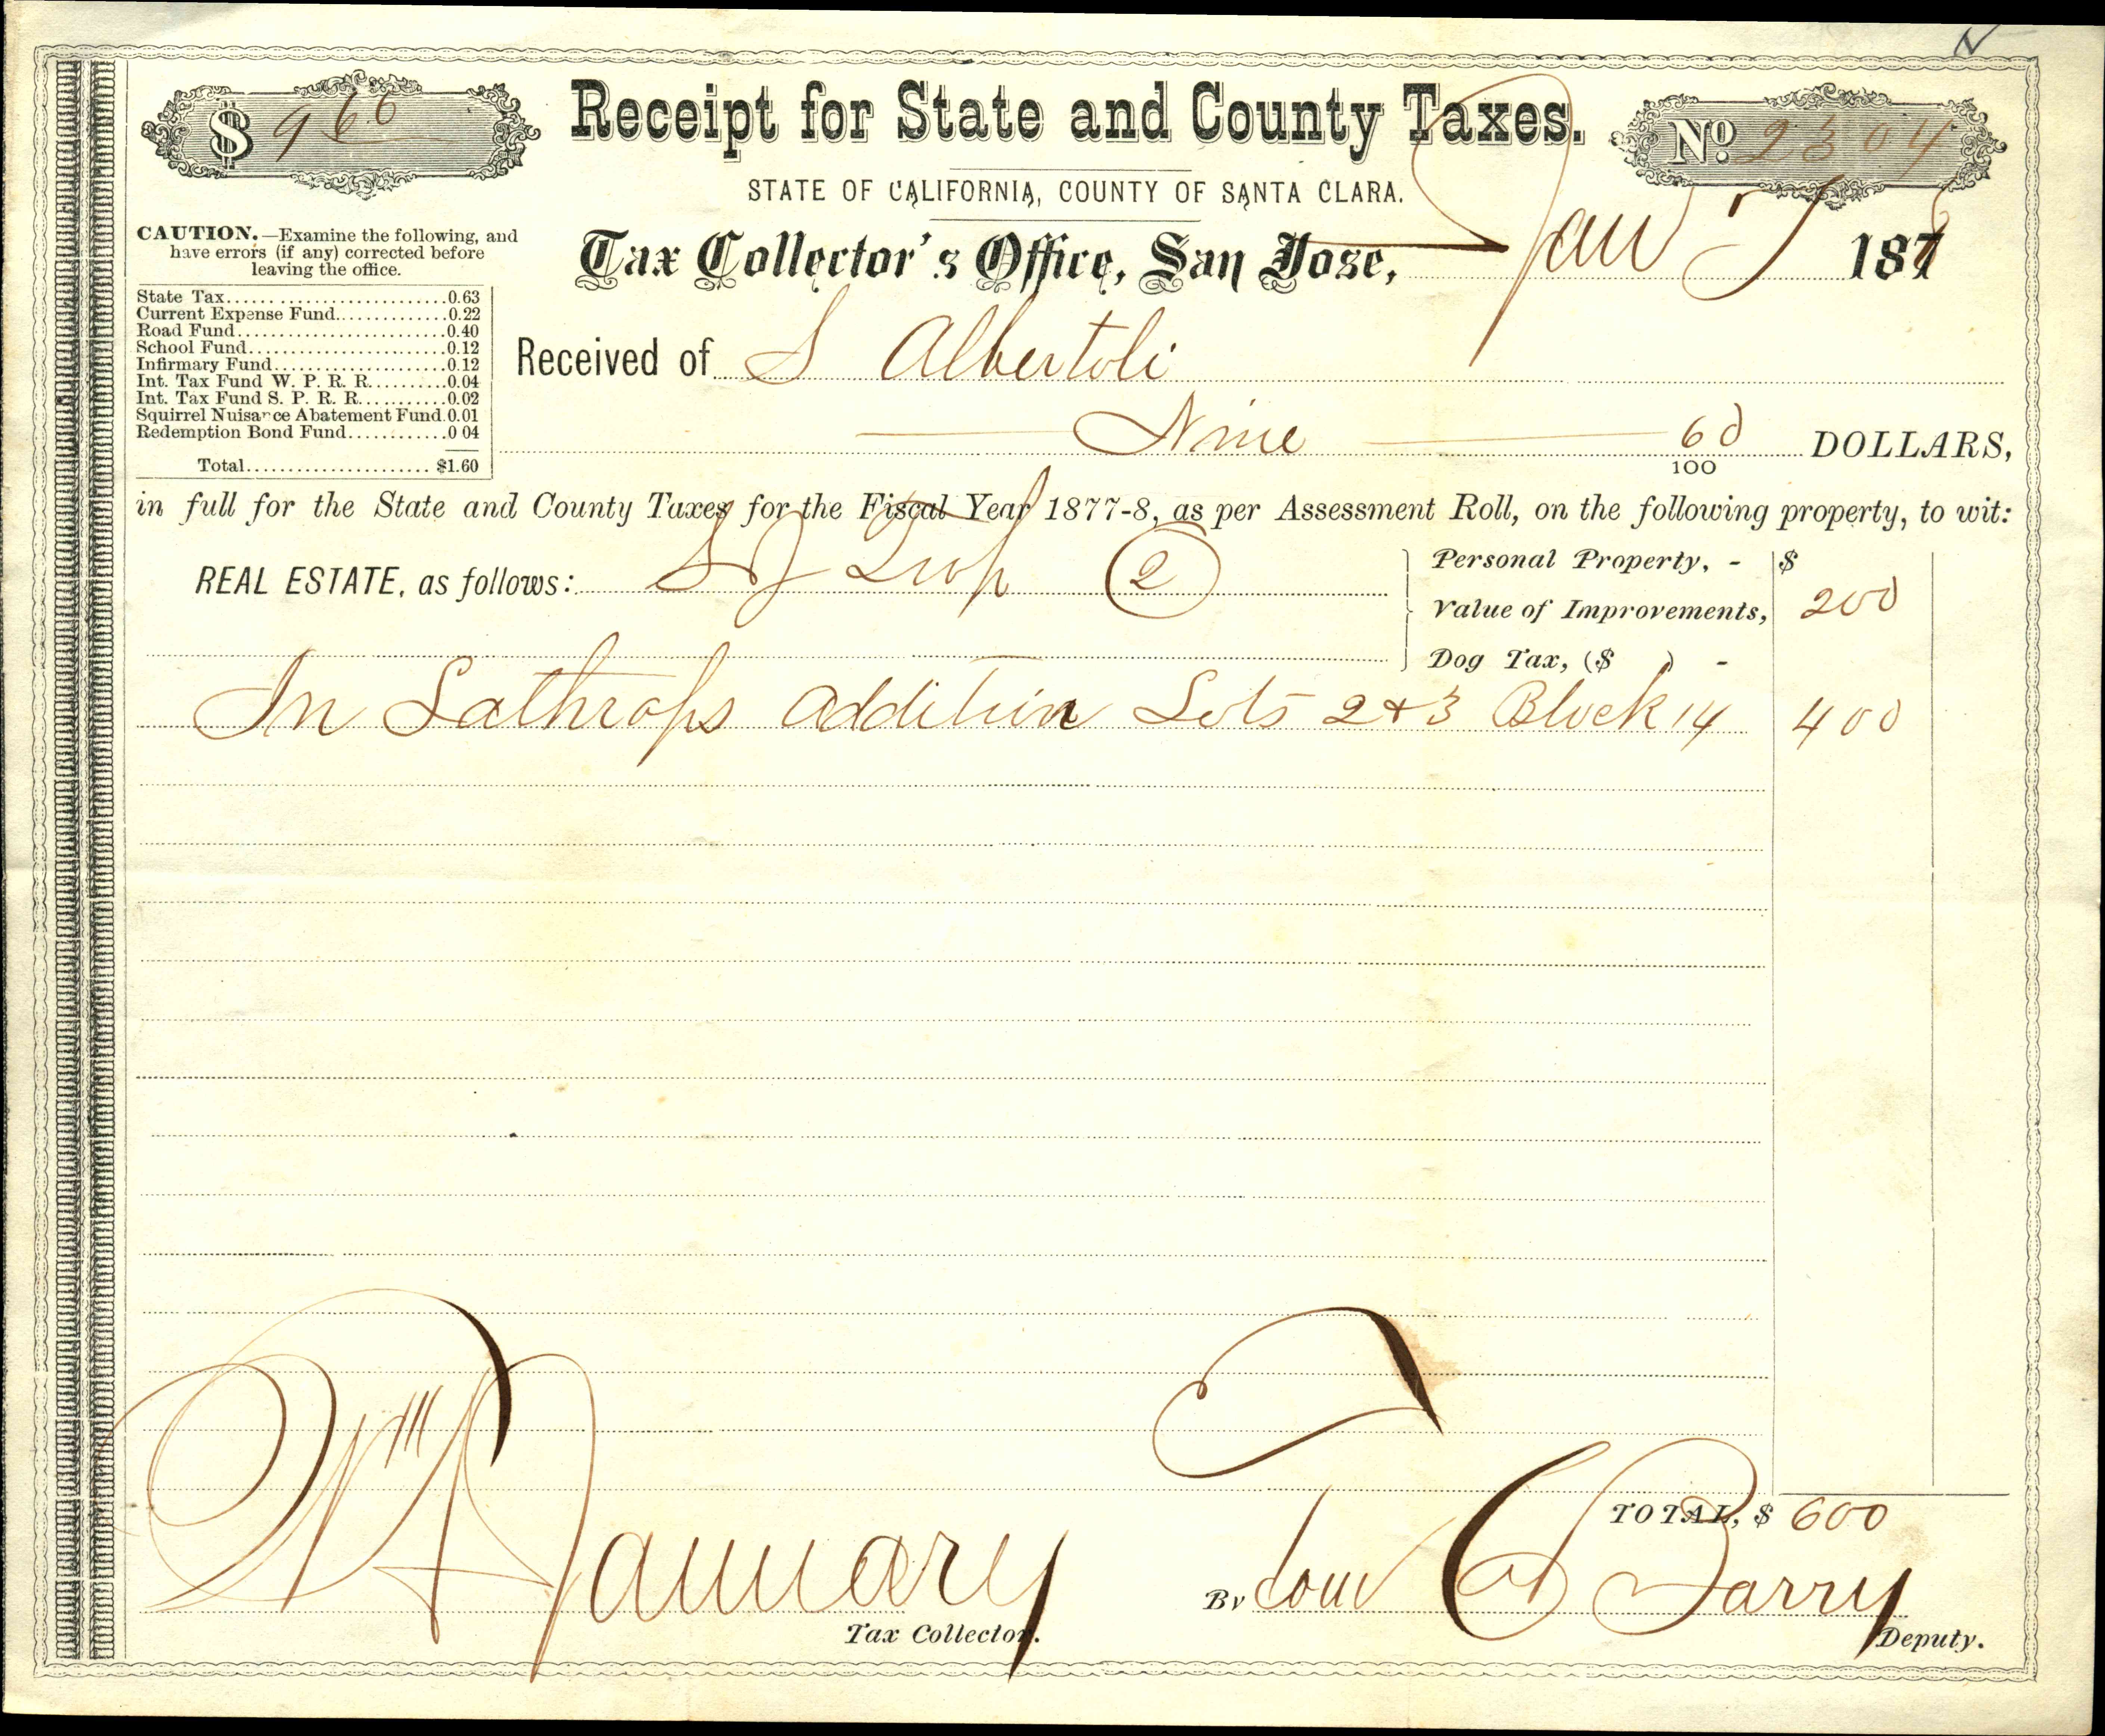 Receipt for State and County Taxes